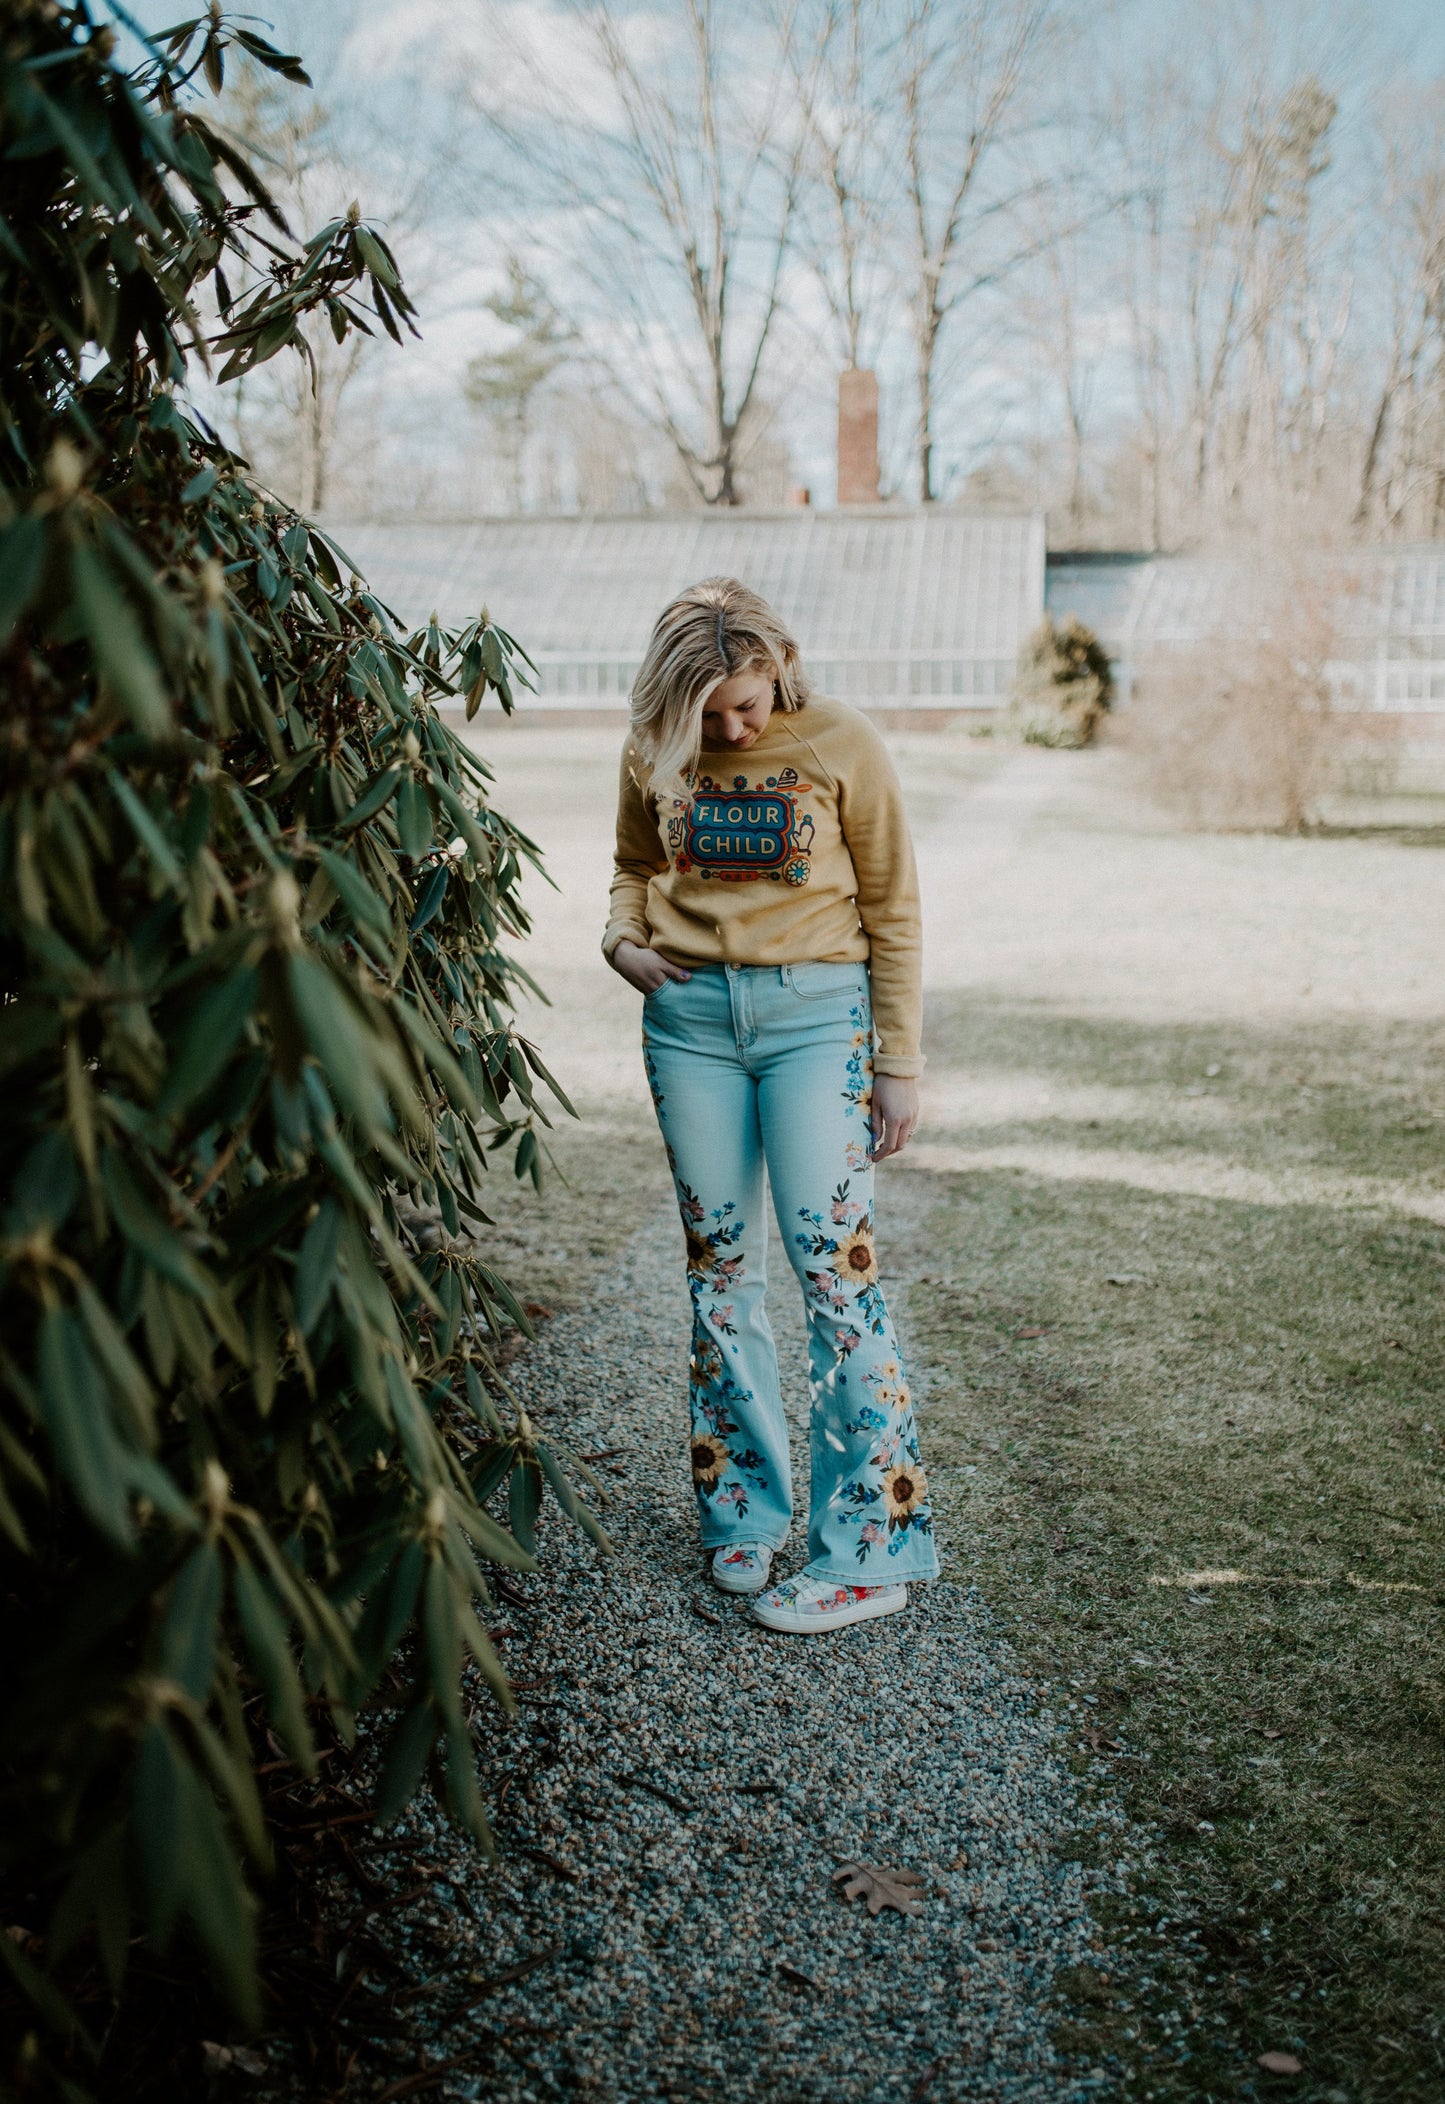 A woman standing outside wears a yellow Flour Child crewneck and light embroidered jeans